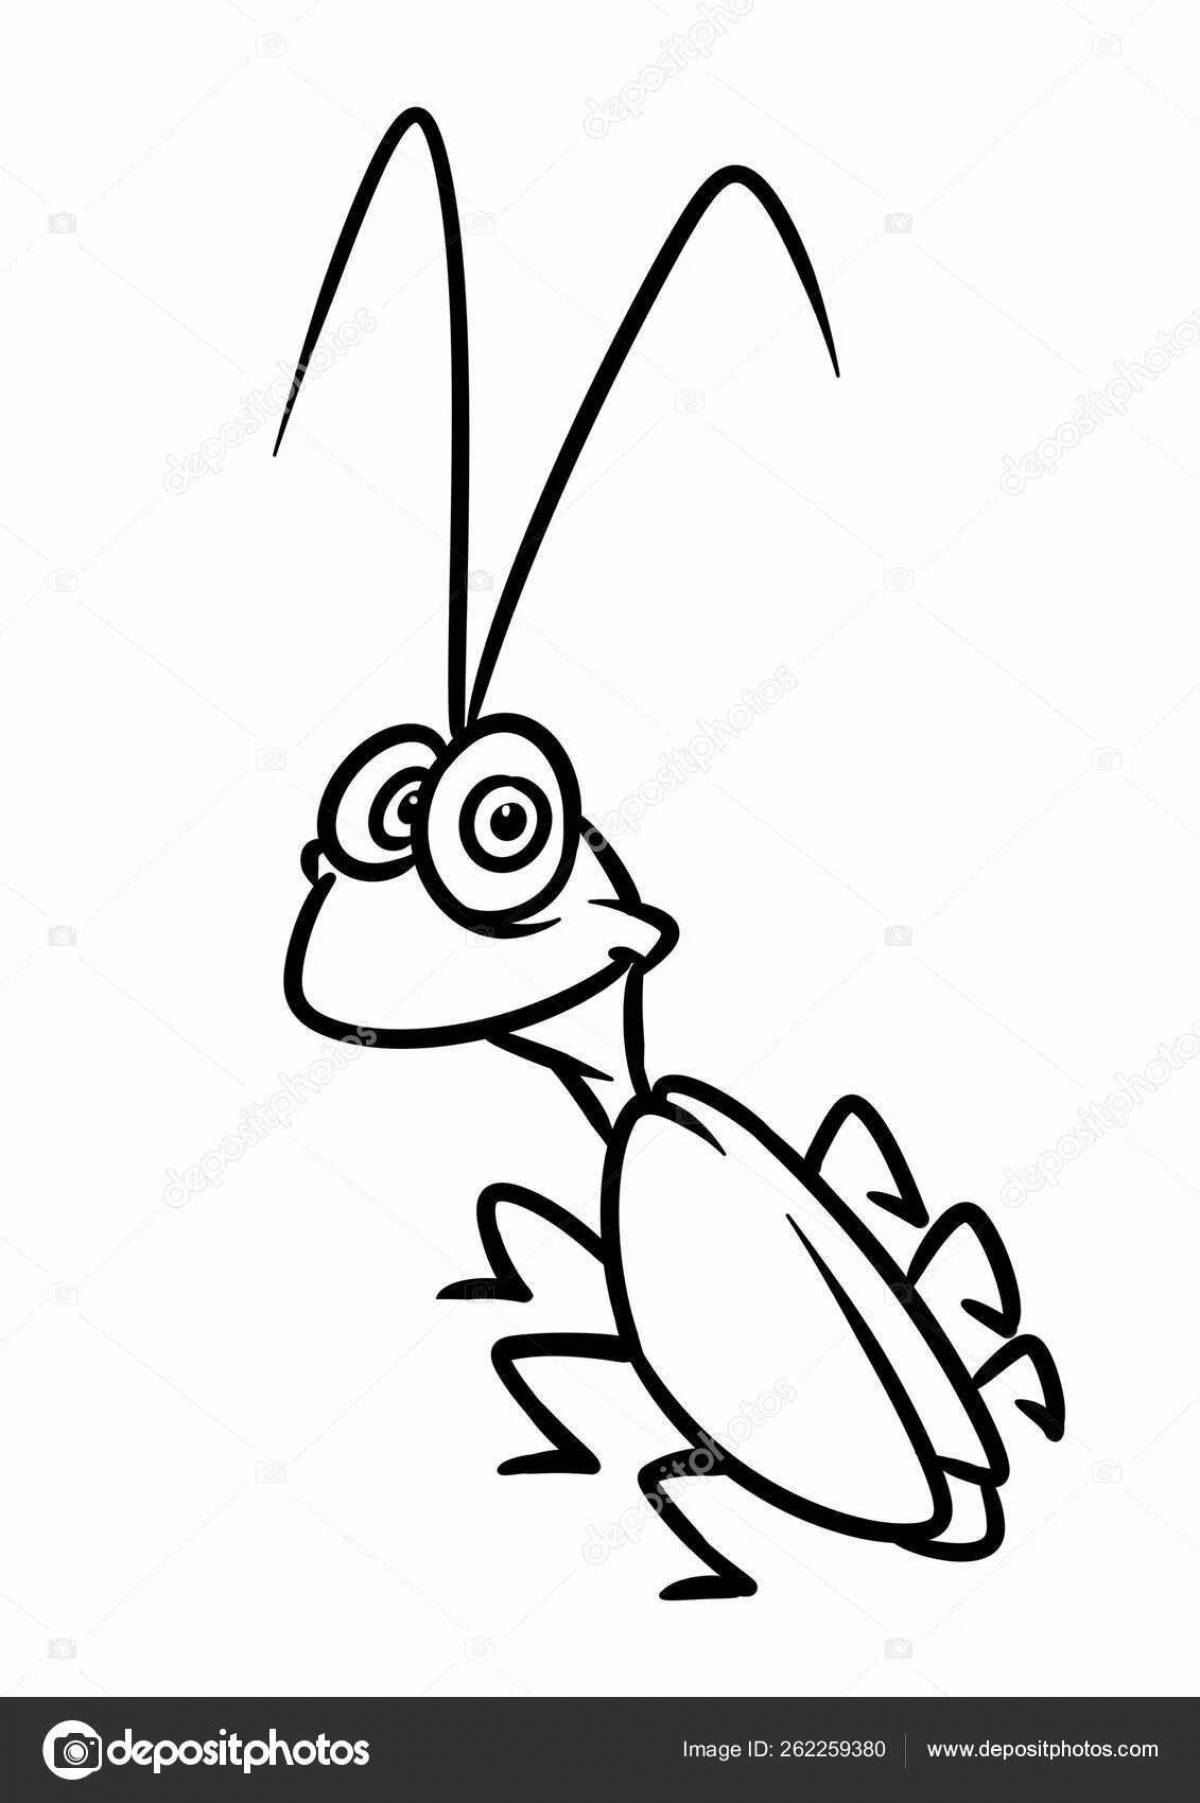 Outstanding cockroach coloring page for kids